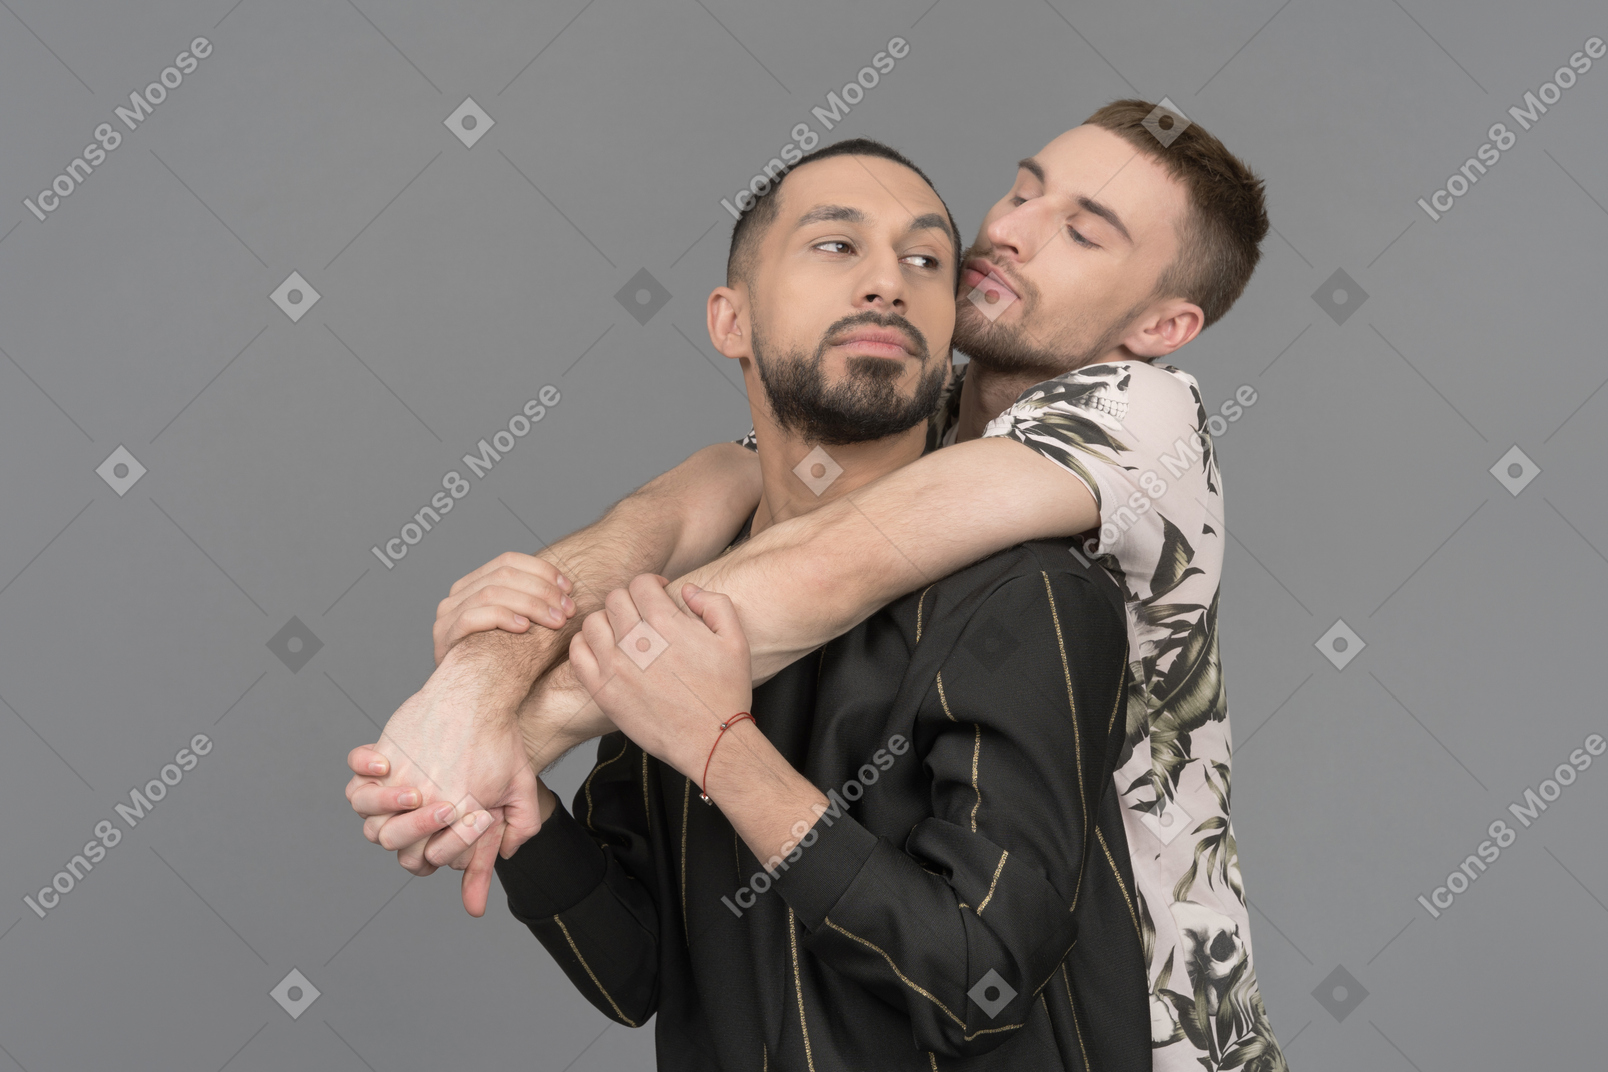 Young caucasian man hanging on the back of another man loosely